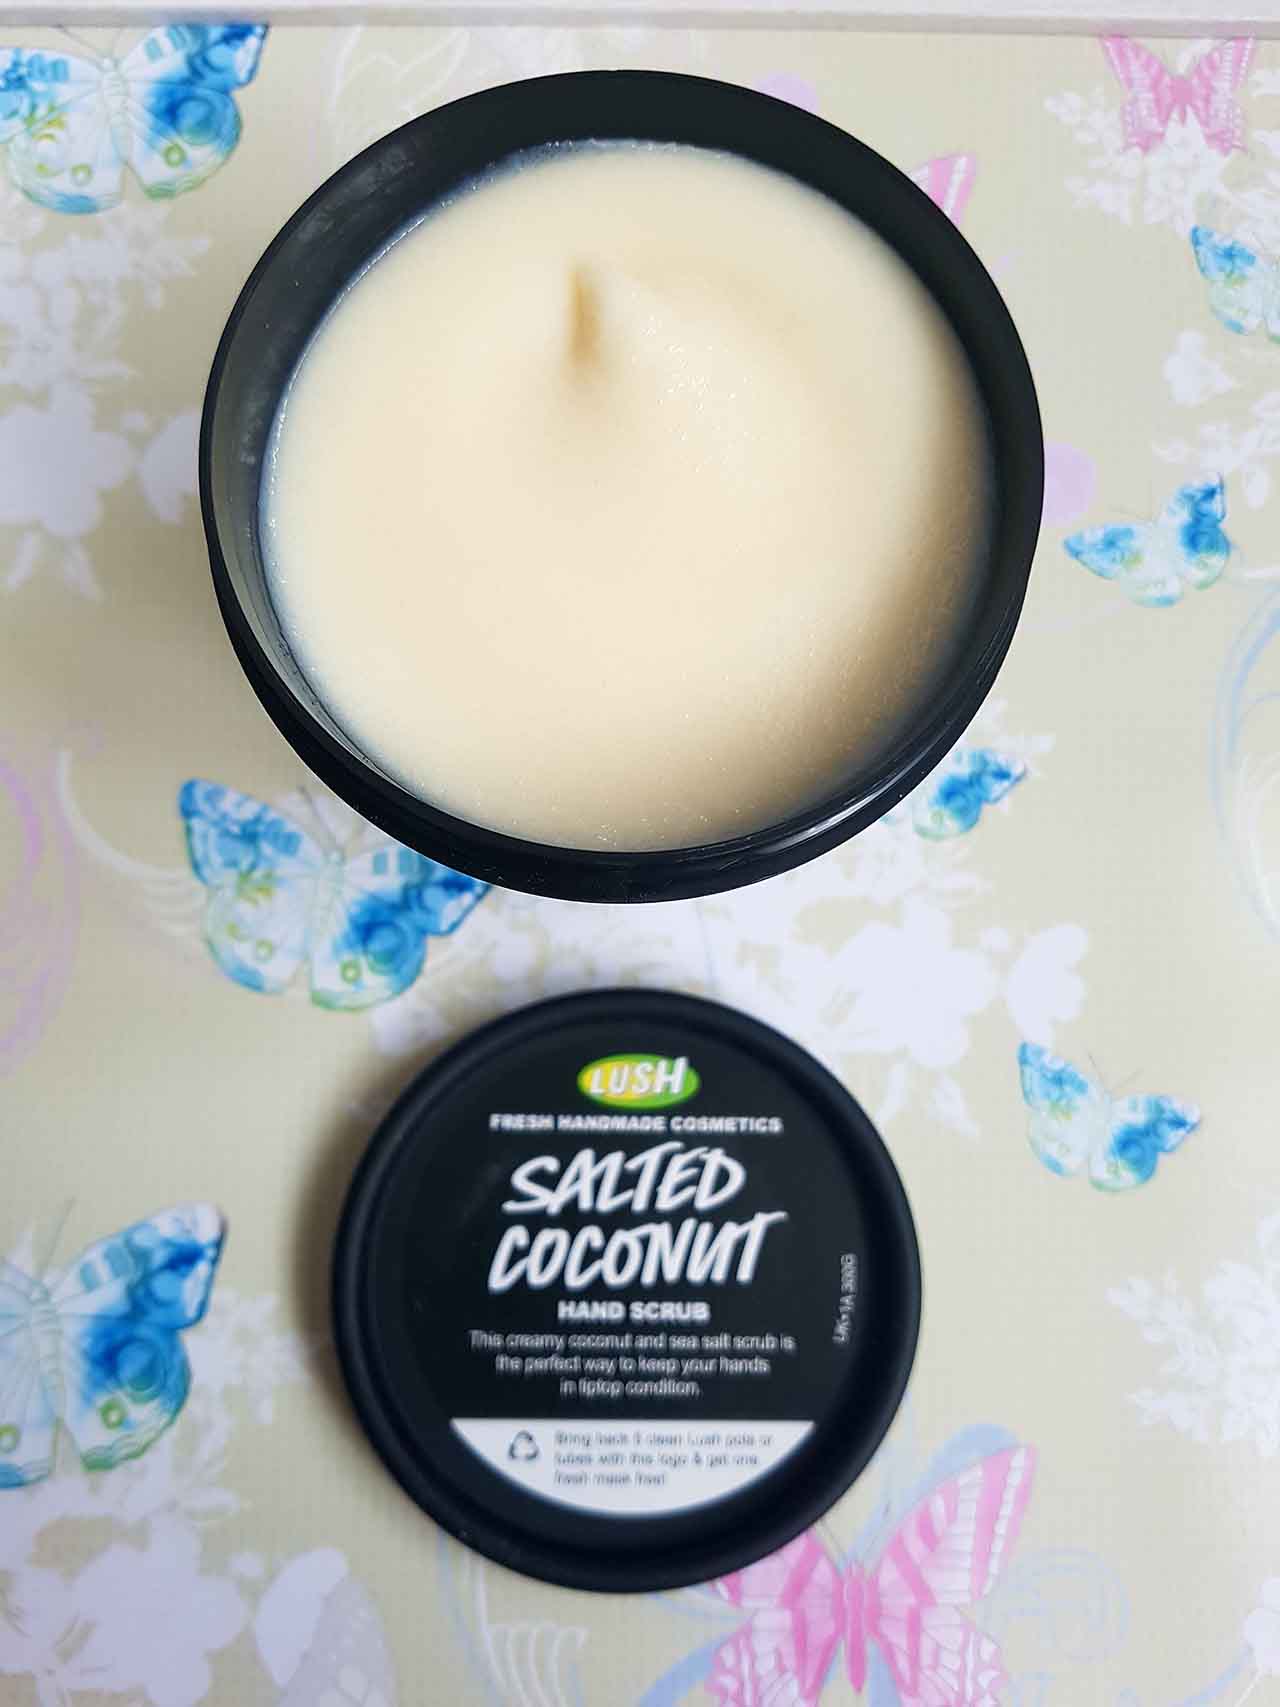 Lush Fresh Handmade Cosmetics – How Lush Are They: The Salted Coconut Hand Scrub - When I bought this scrub, I was suffering with dry skin on my hands and rough areas so I hoped this scrub would help to get rid of any flaky rough skin and moisturize at the same time. It contains argan oil, extra virgin coconut oil, sea salt and lemon infusion and can be used on wet and dry hands. I used it both ways and have to say it worked a treat! When used dry it is tougher on the skin but not in a damaging way – it simply works harder to remove the dead skin. When used wet it feels gentler but still leaves the hands feeling soft and smooth afterwards. Your hands also smell lovely and fresh for a while after use!